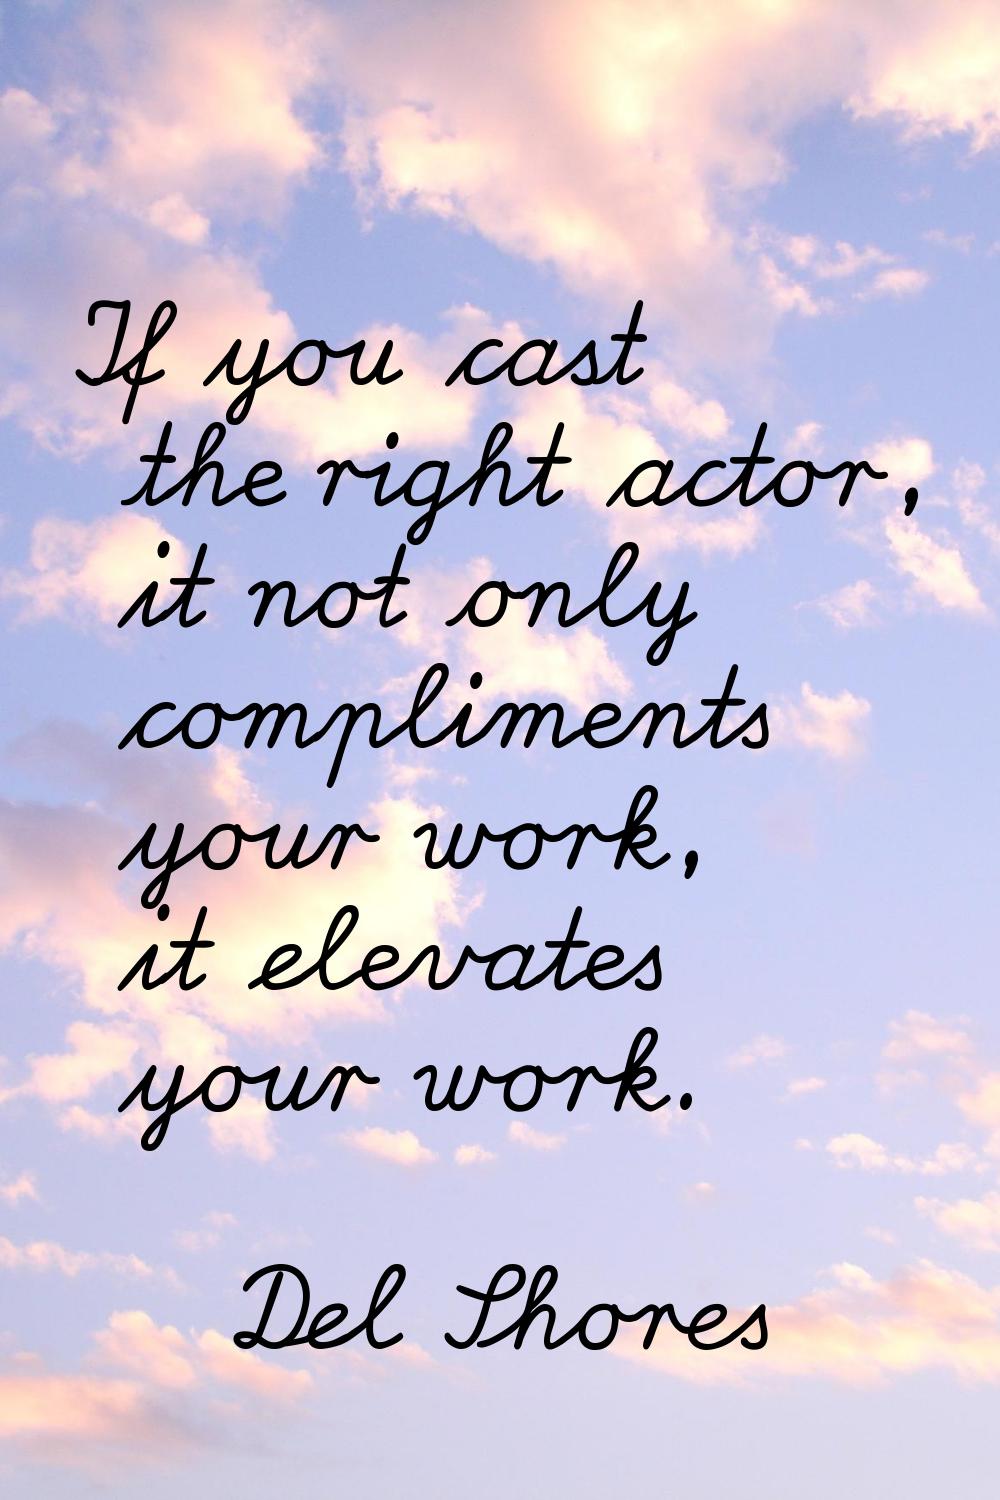 If you cast the right actor, it not only compliments your work, it elevates your work.